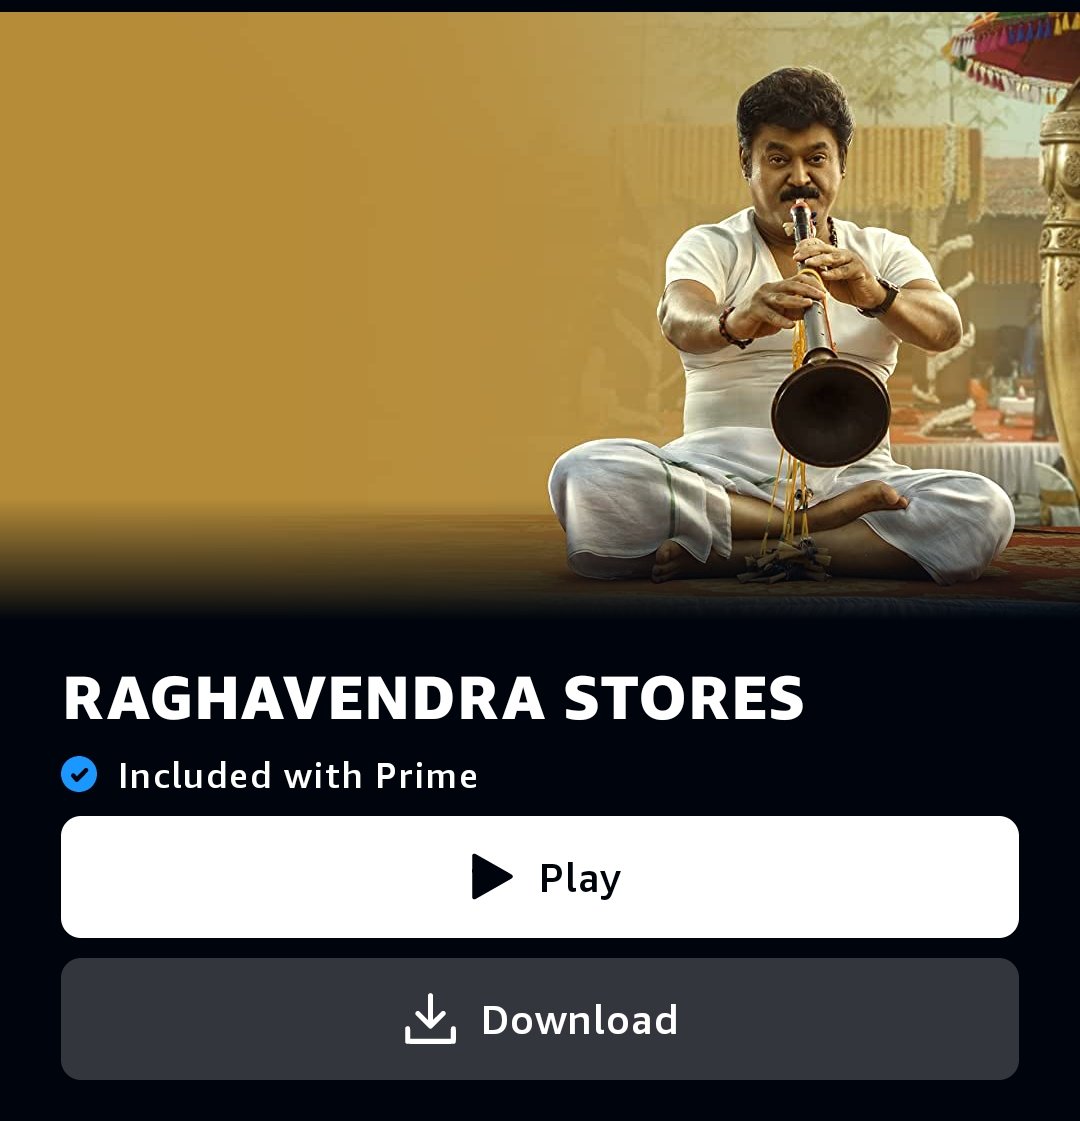 💥 #RaghavendraStores Now Streaming On Prime Video 💥

Check Out Here:
app.primevideo.com/detail?gti=amz…